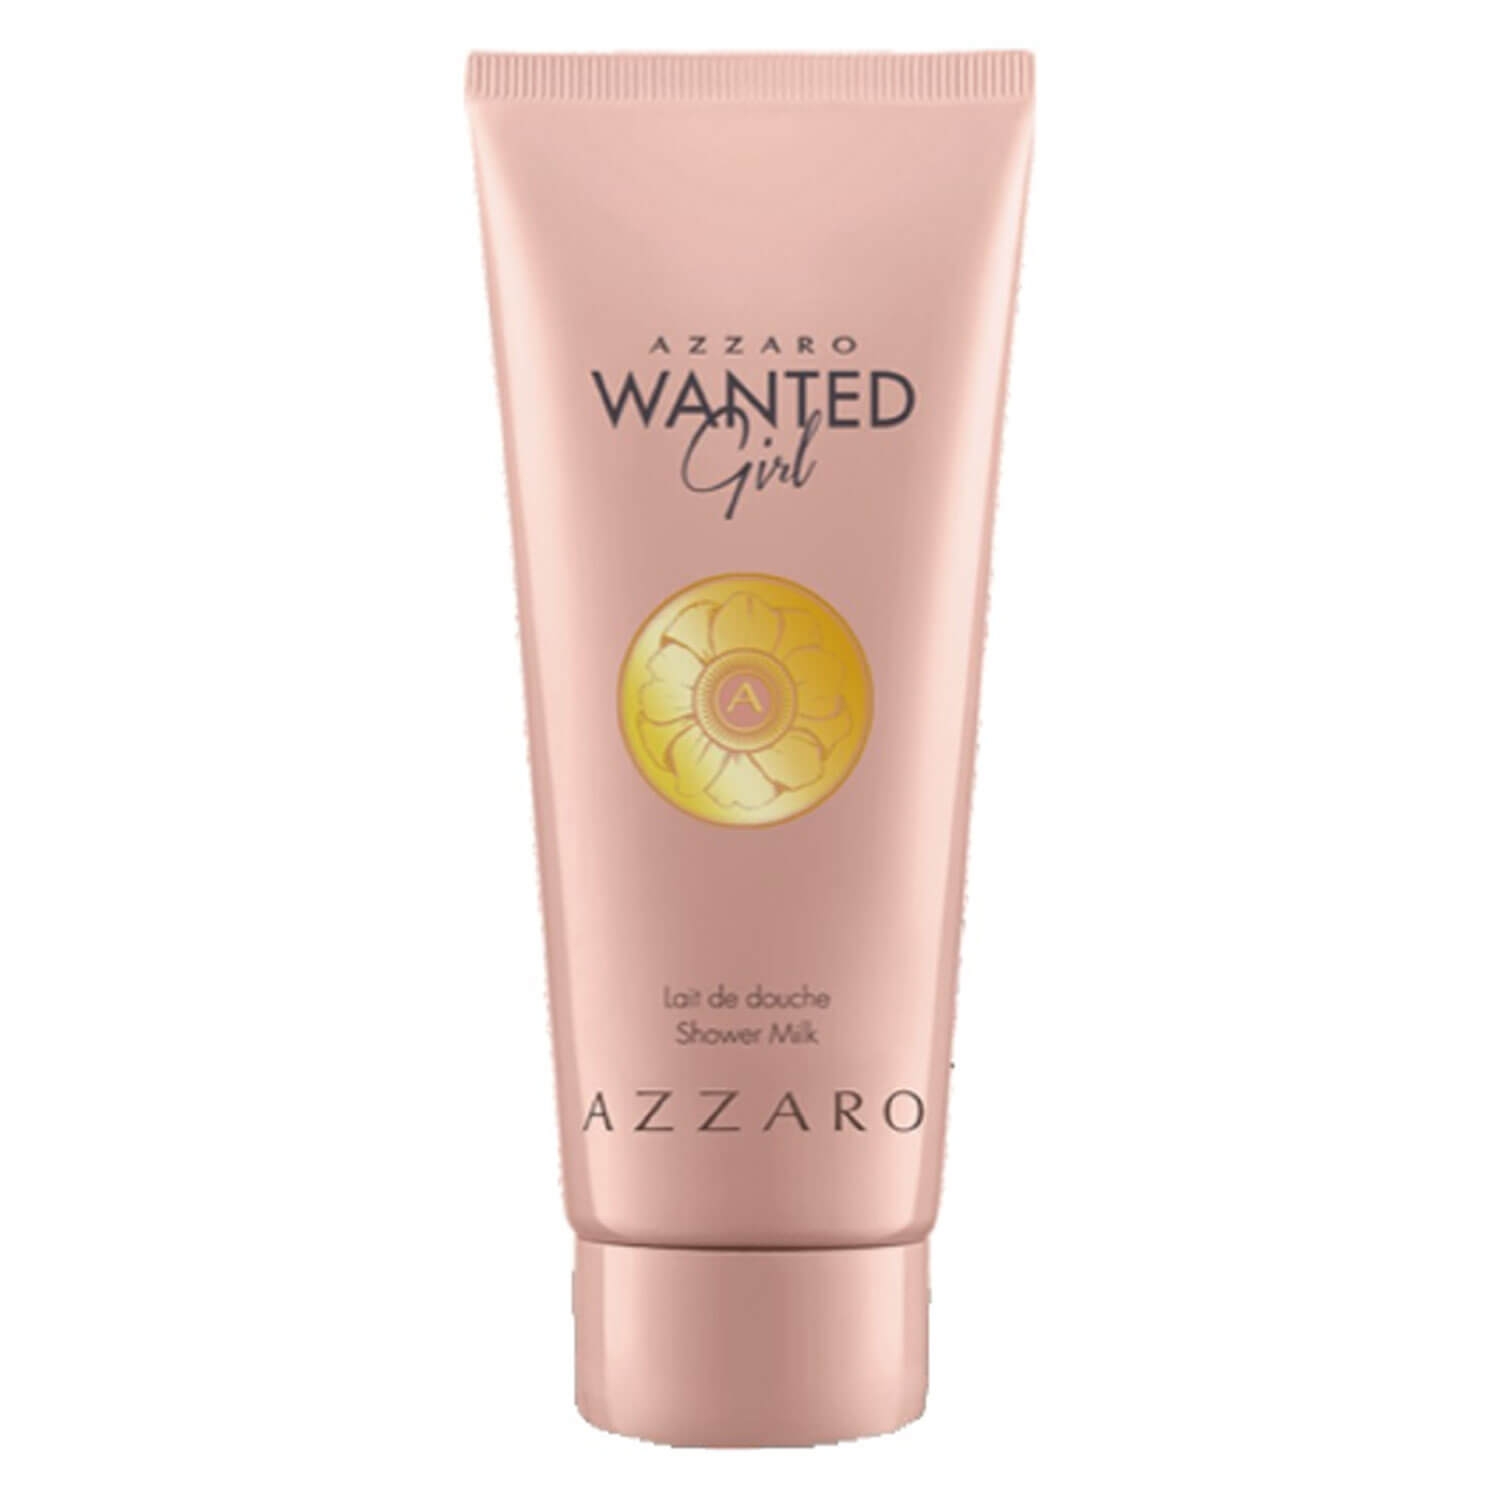 Product image from Azzaro Wanted - Girl Shower Milk